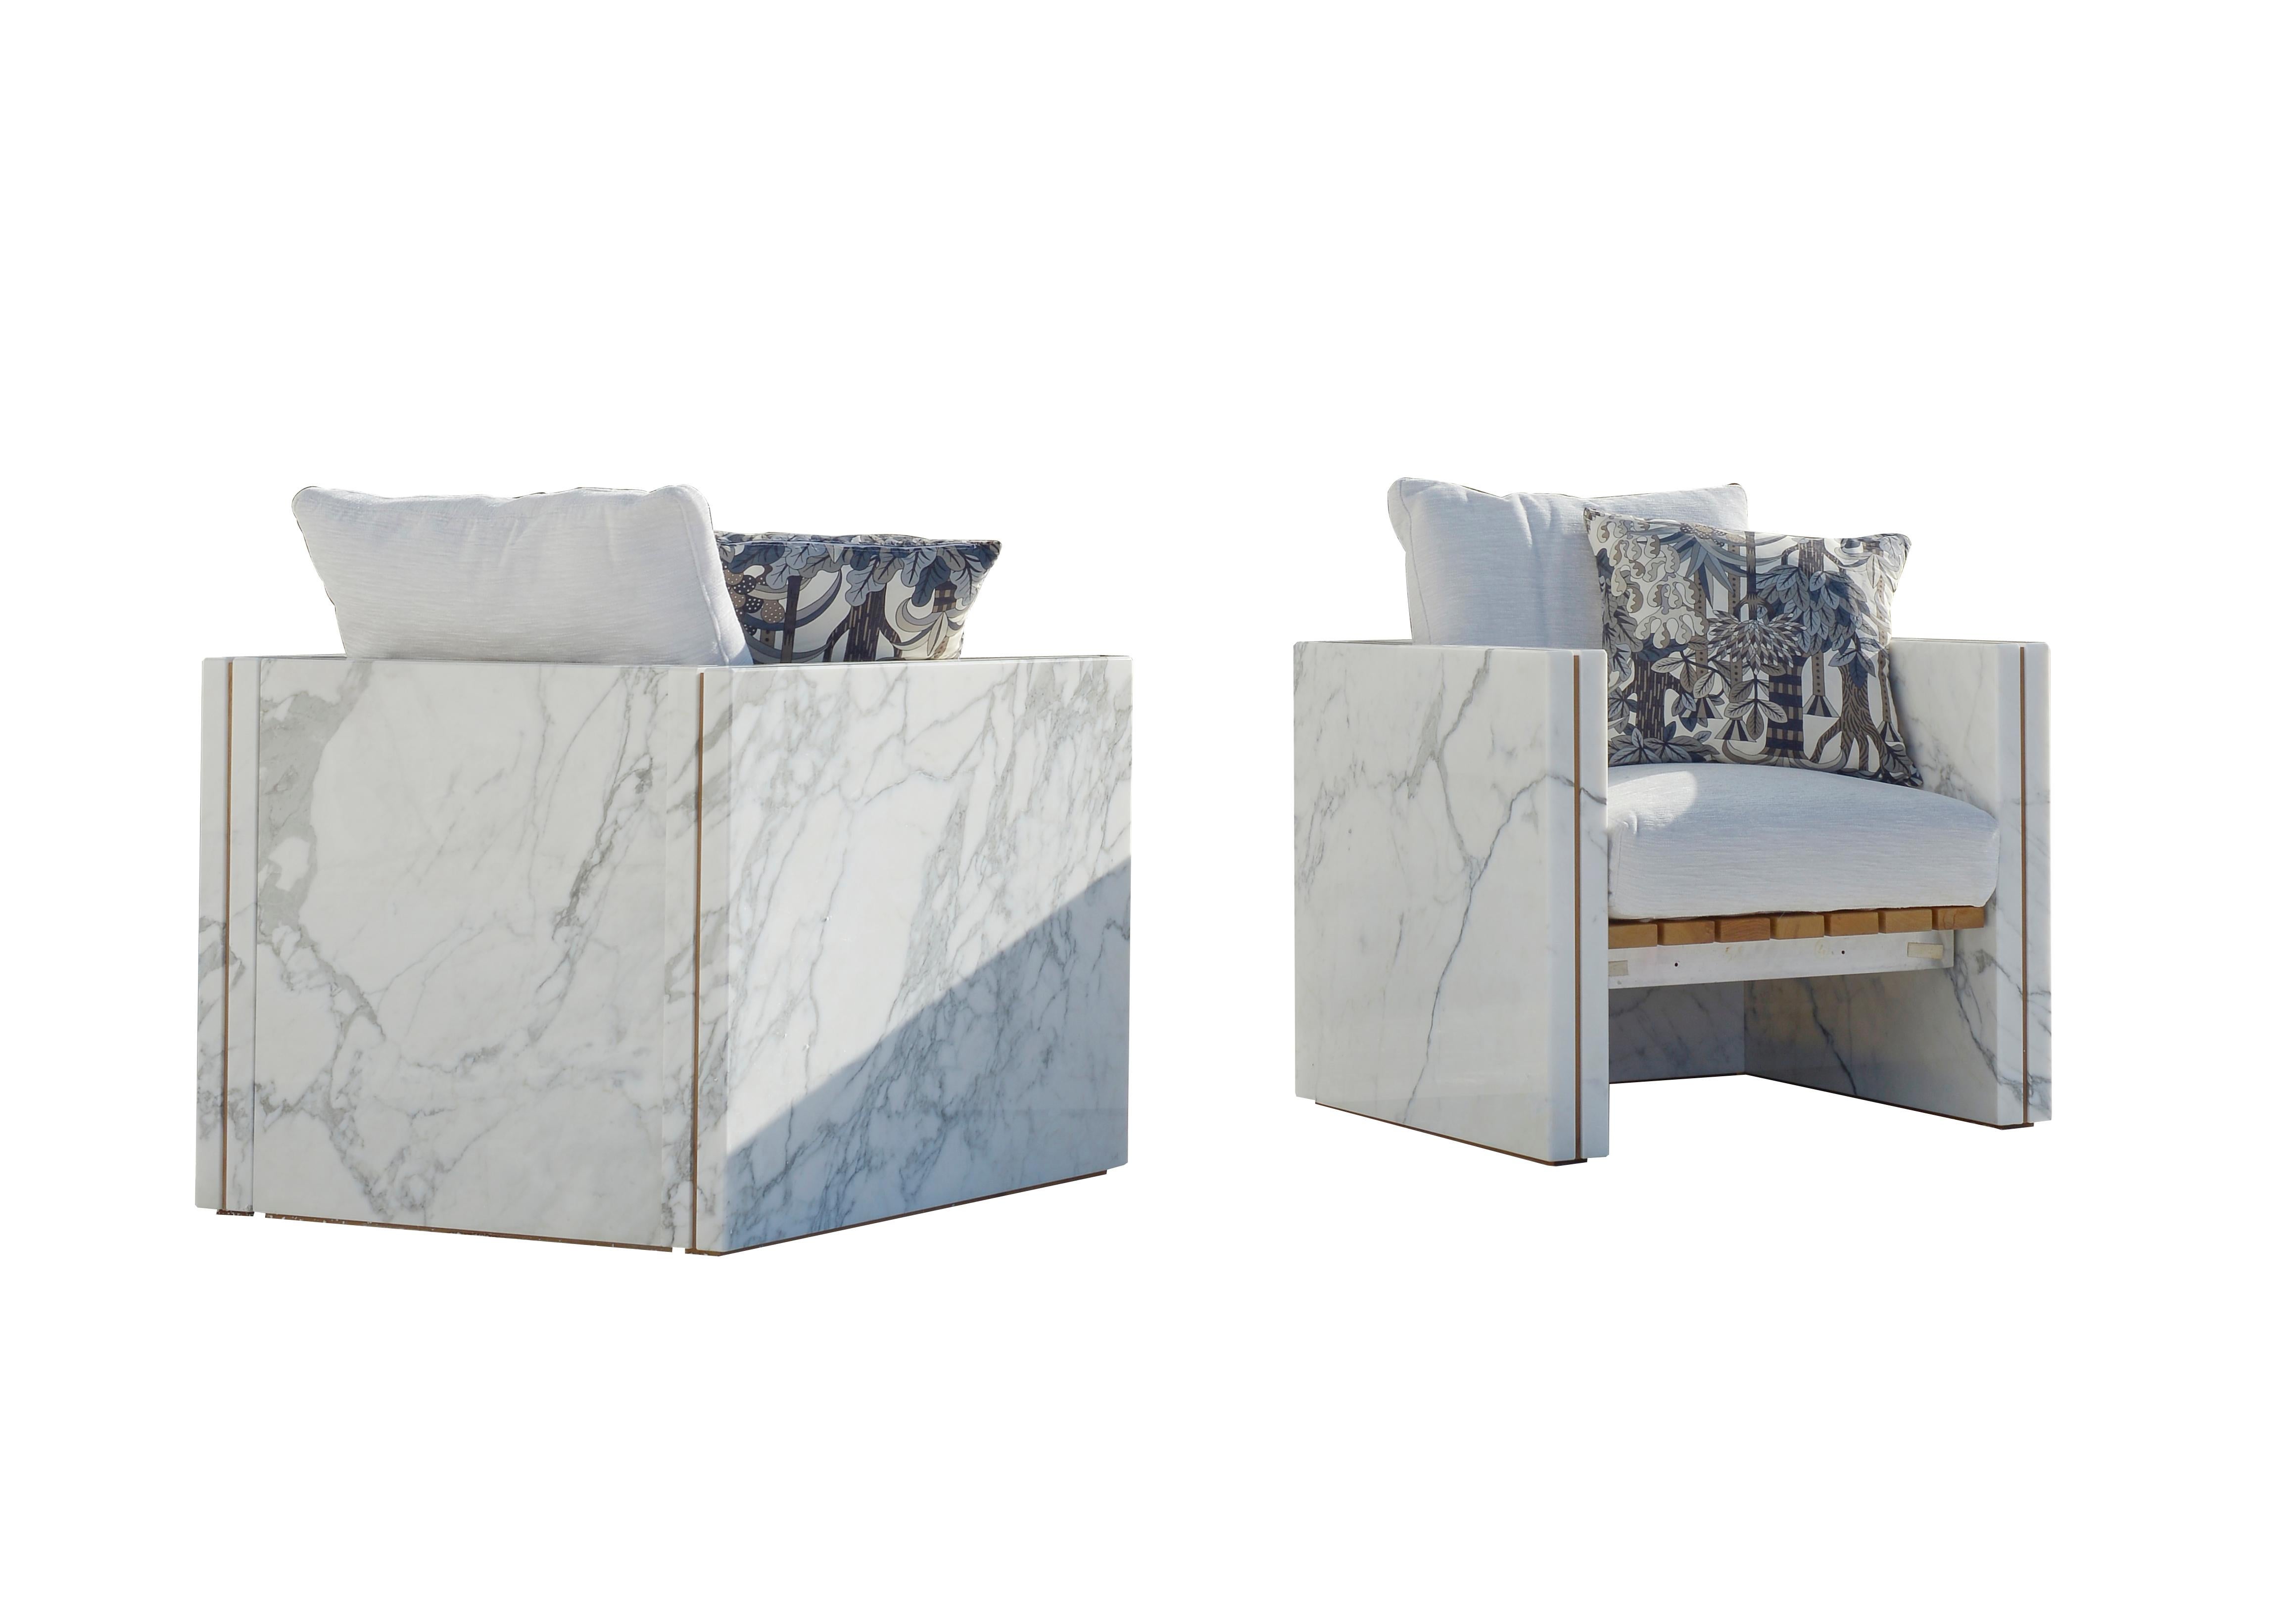 Polished 21st Century Bettogli White Statuario Marble Armchair with Armrests and Cushion For Sale